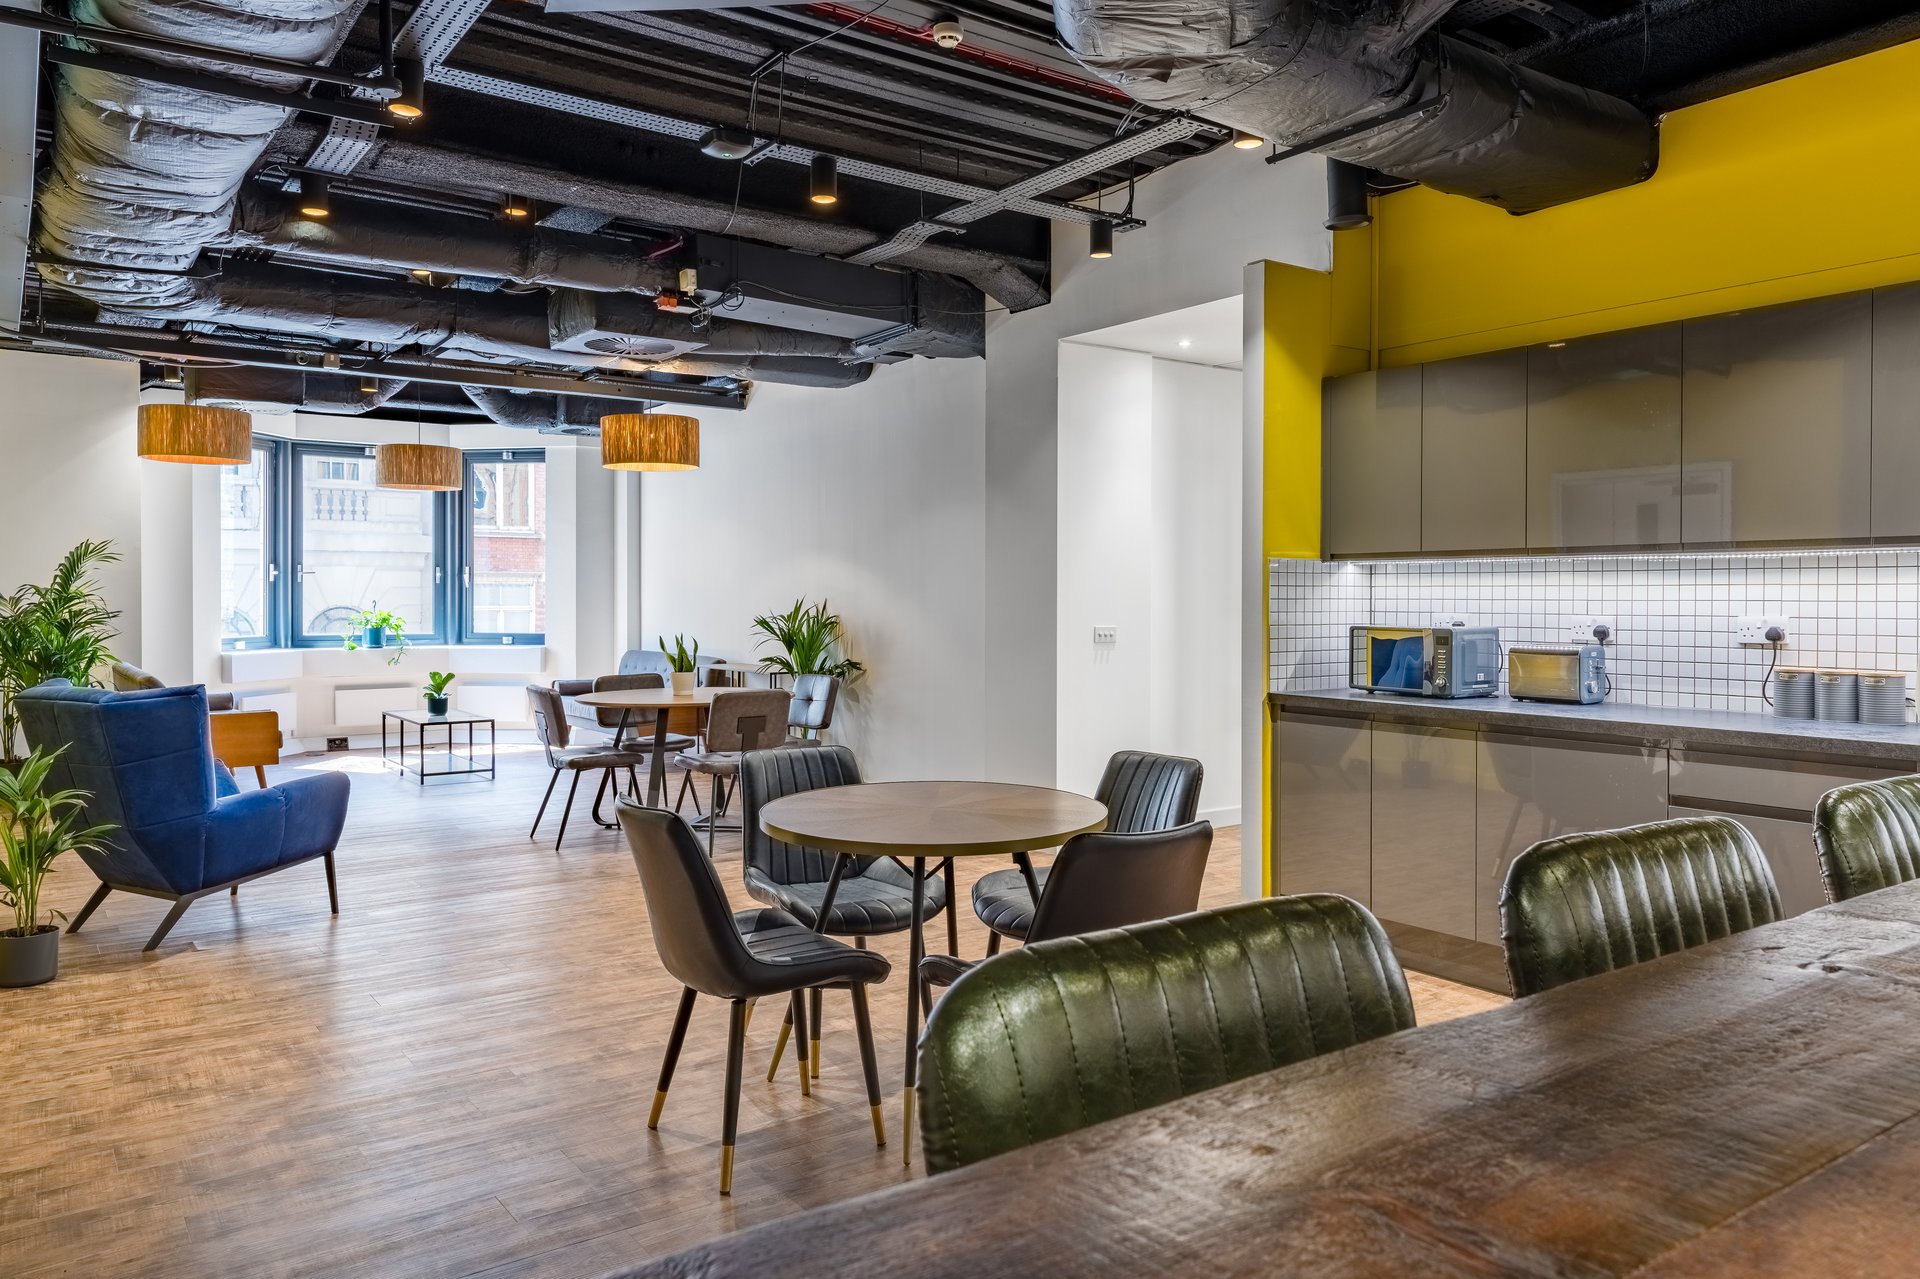 Interior of Boutique Workplace - One Fetter Lane